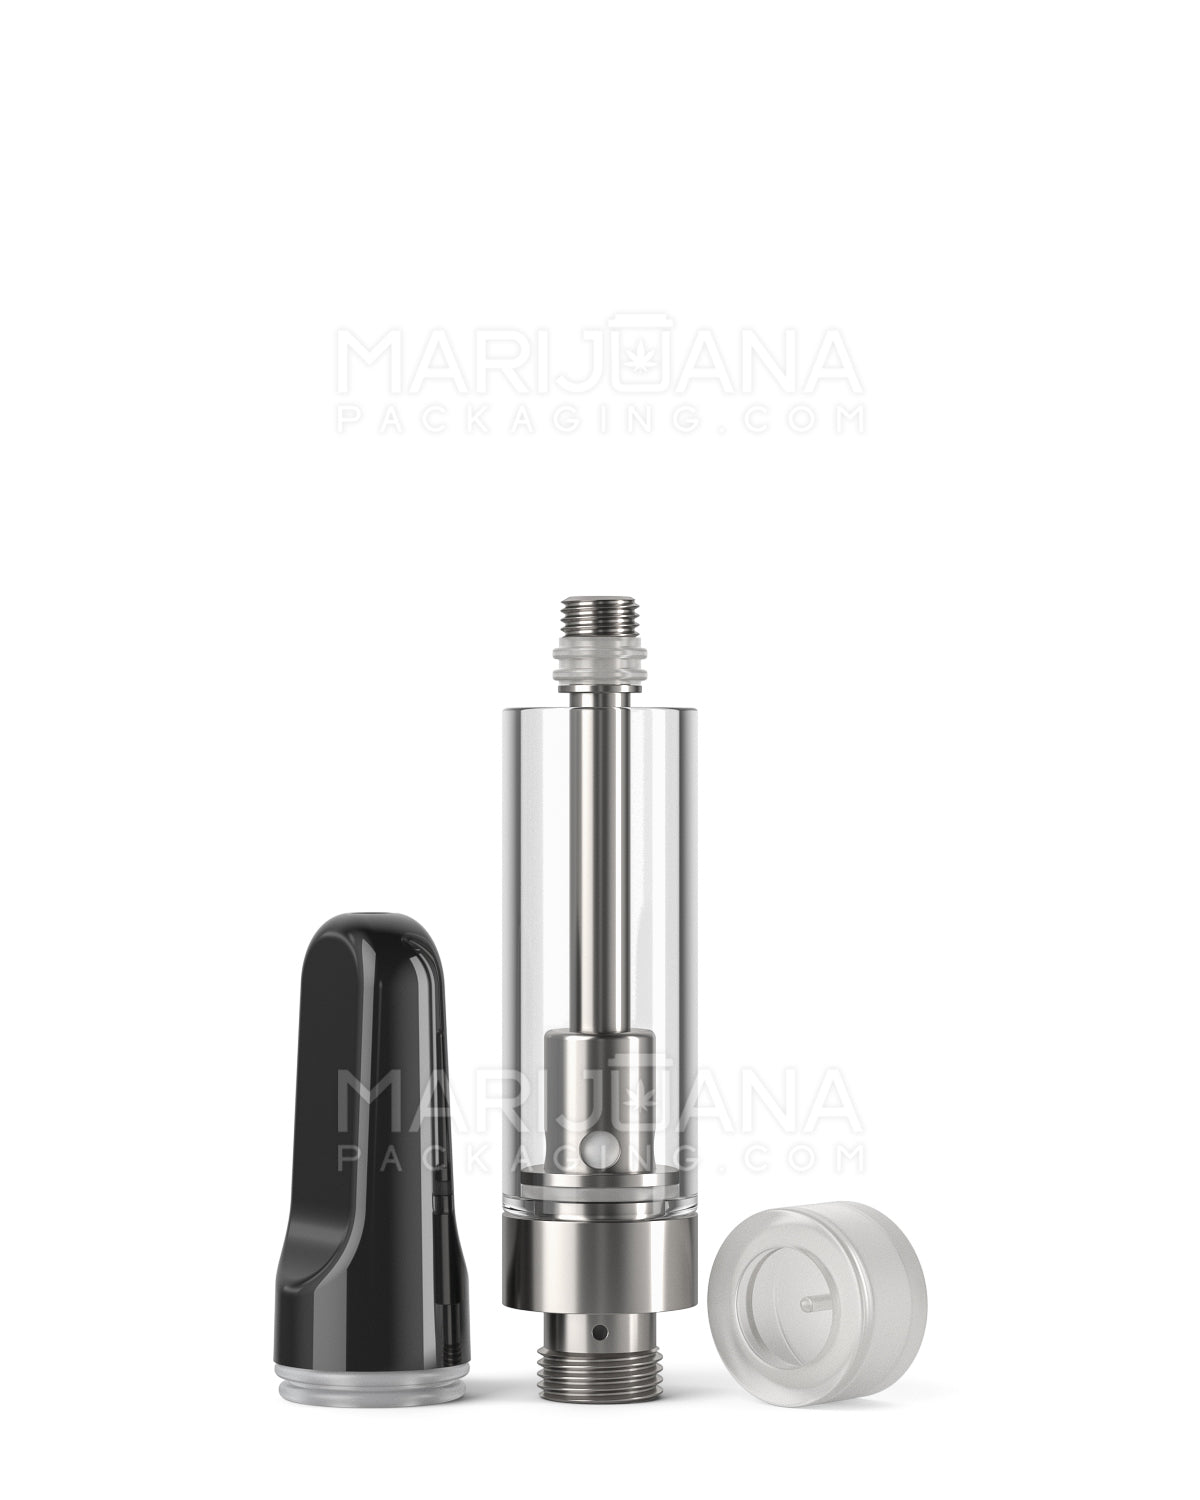 CCELL | Liquid6 Reactor Glass Vape Cartridge with Black Ceramic Mouthpiece | 1mL - Screw On - 100 Count - 5